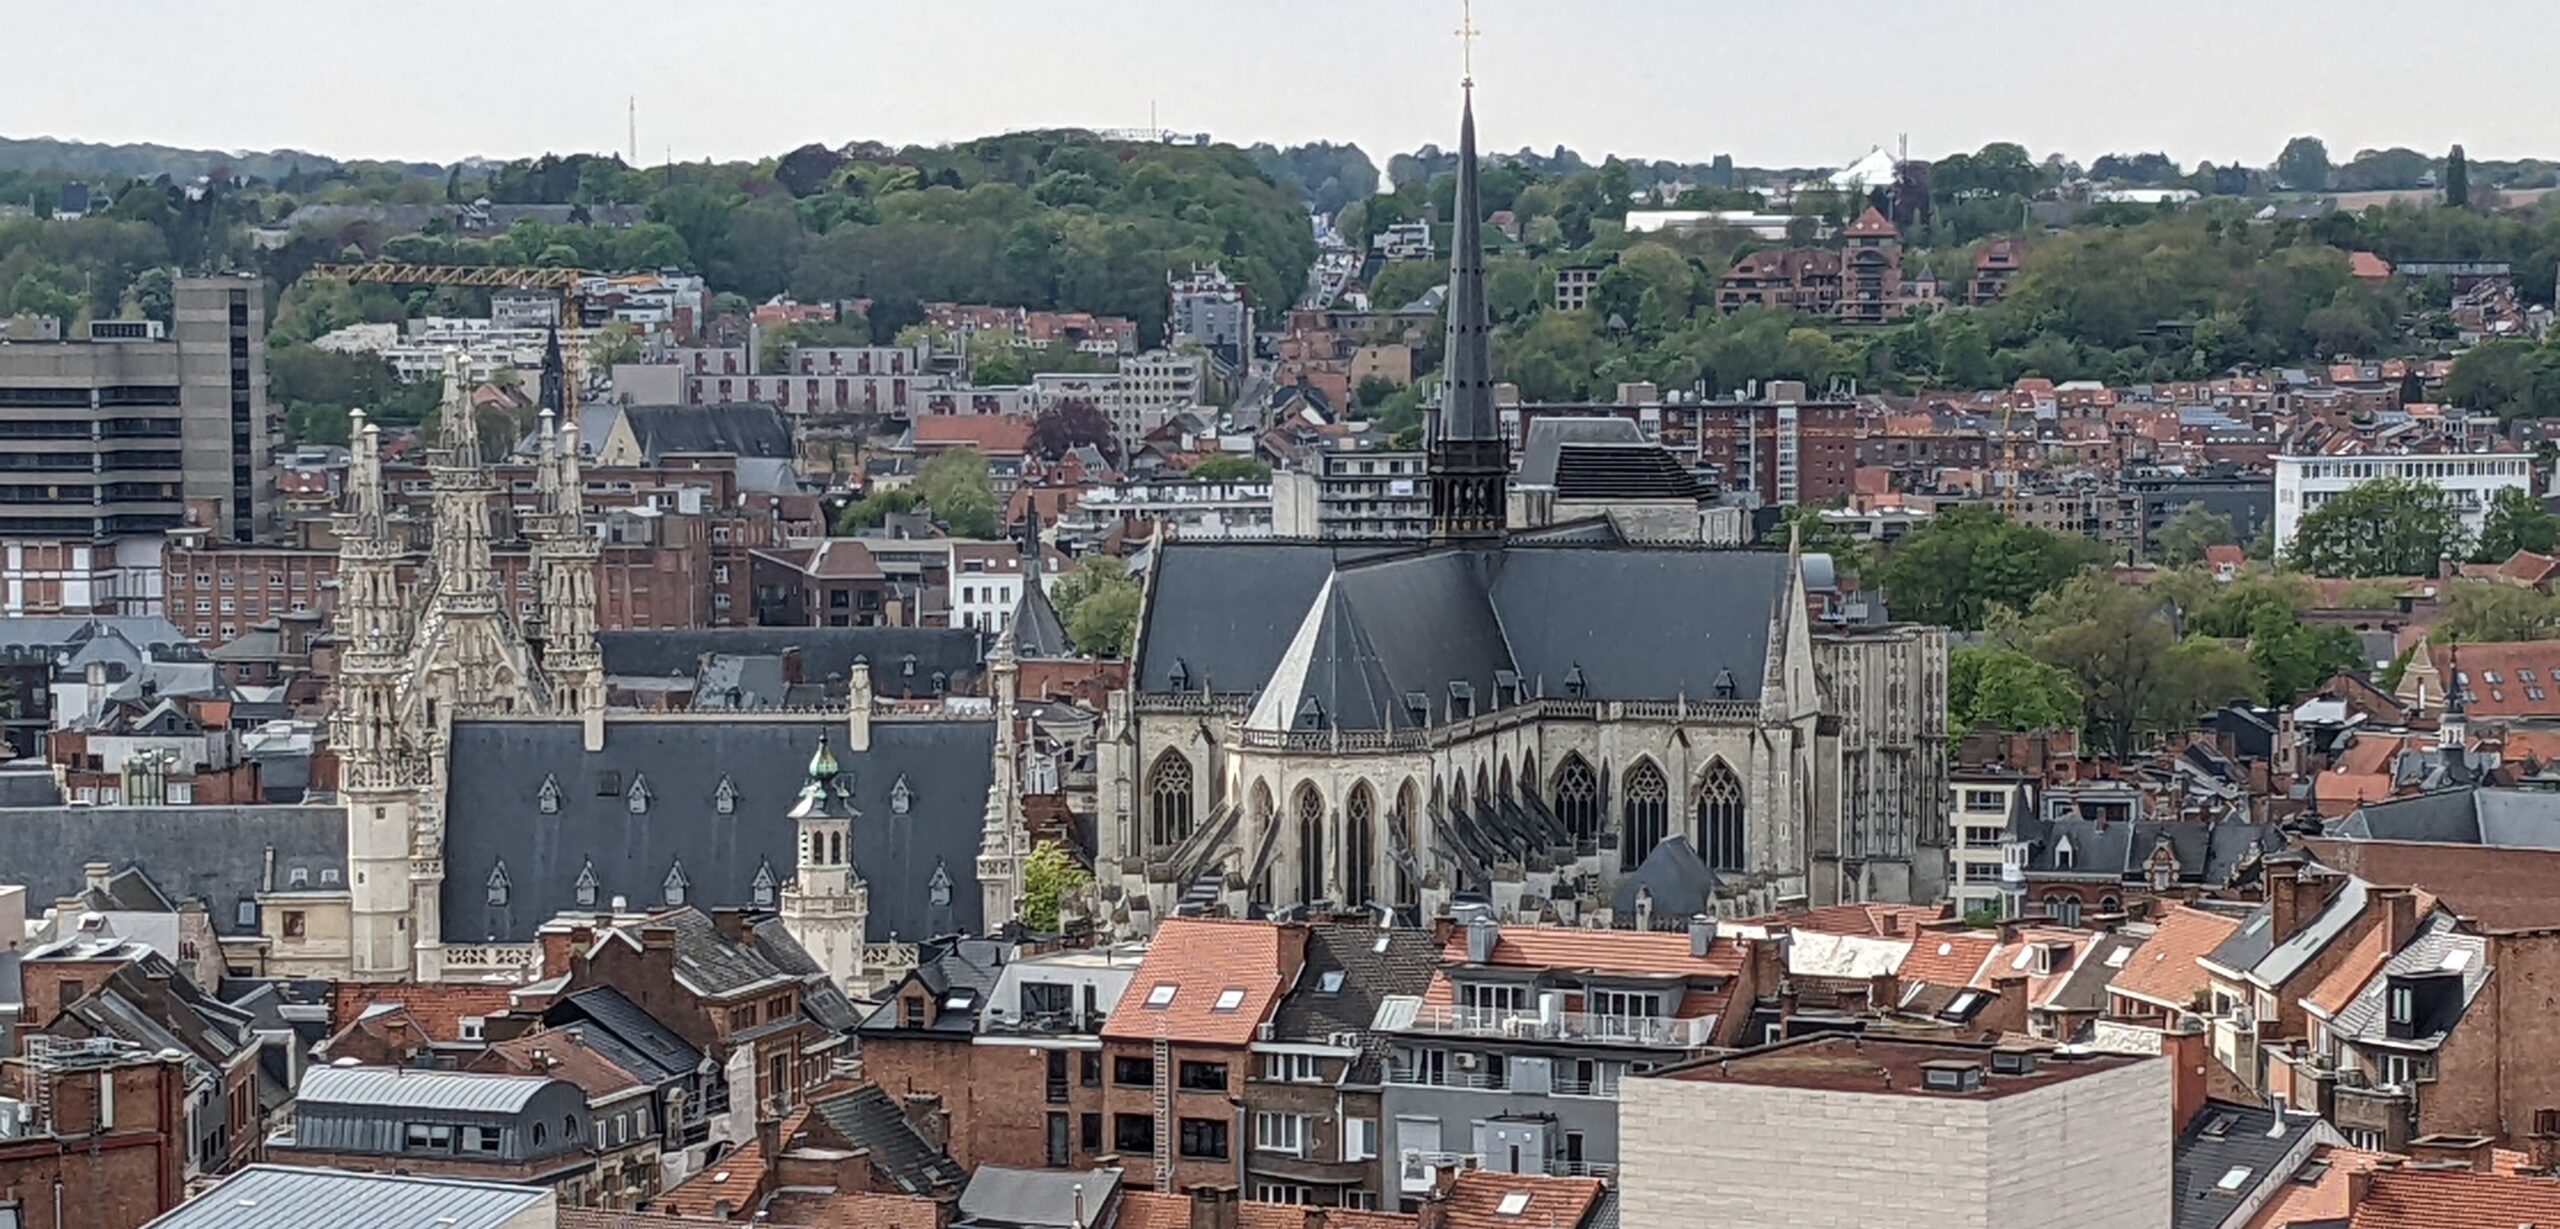 Skyline of Leuven, Belgium with churches, houses and trees